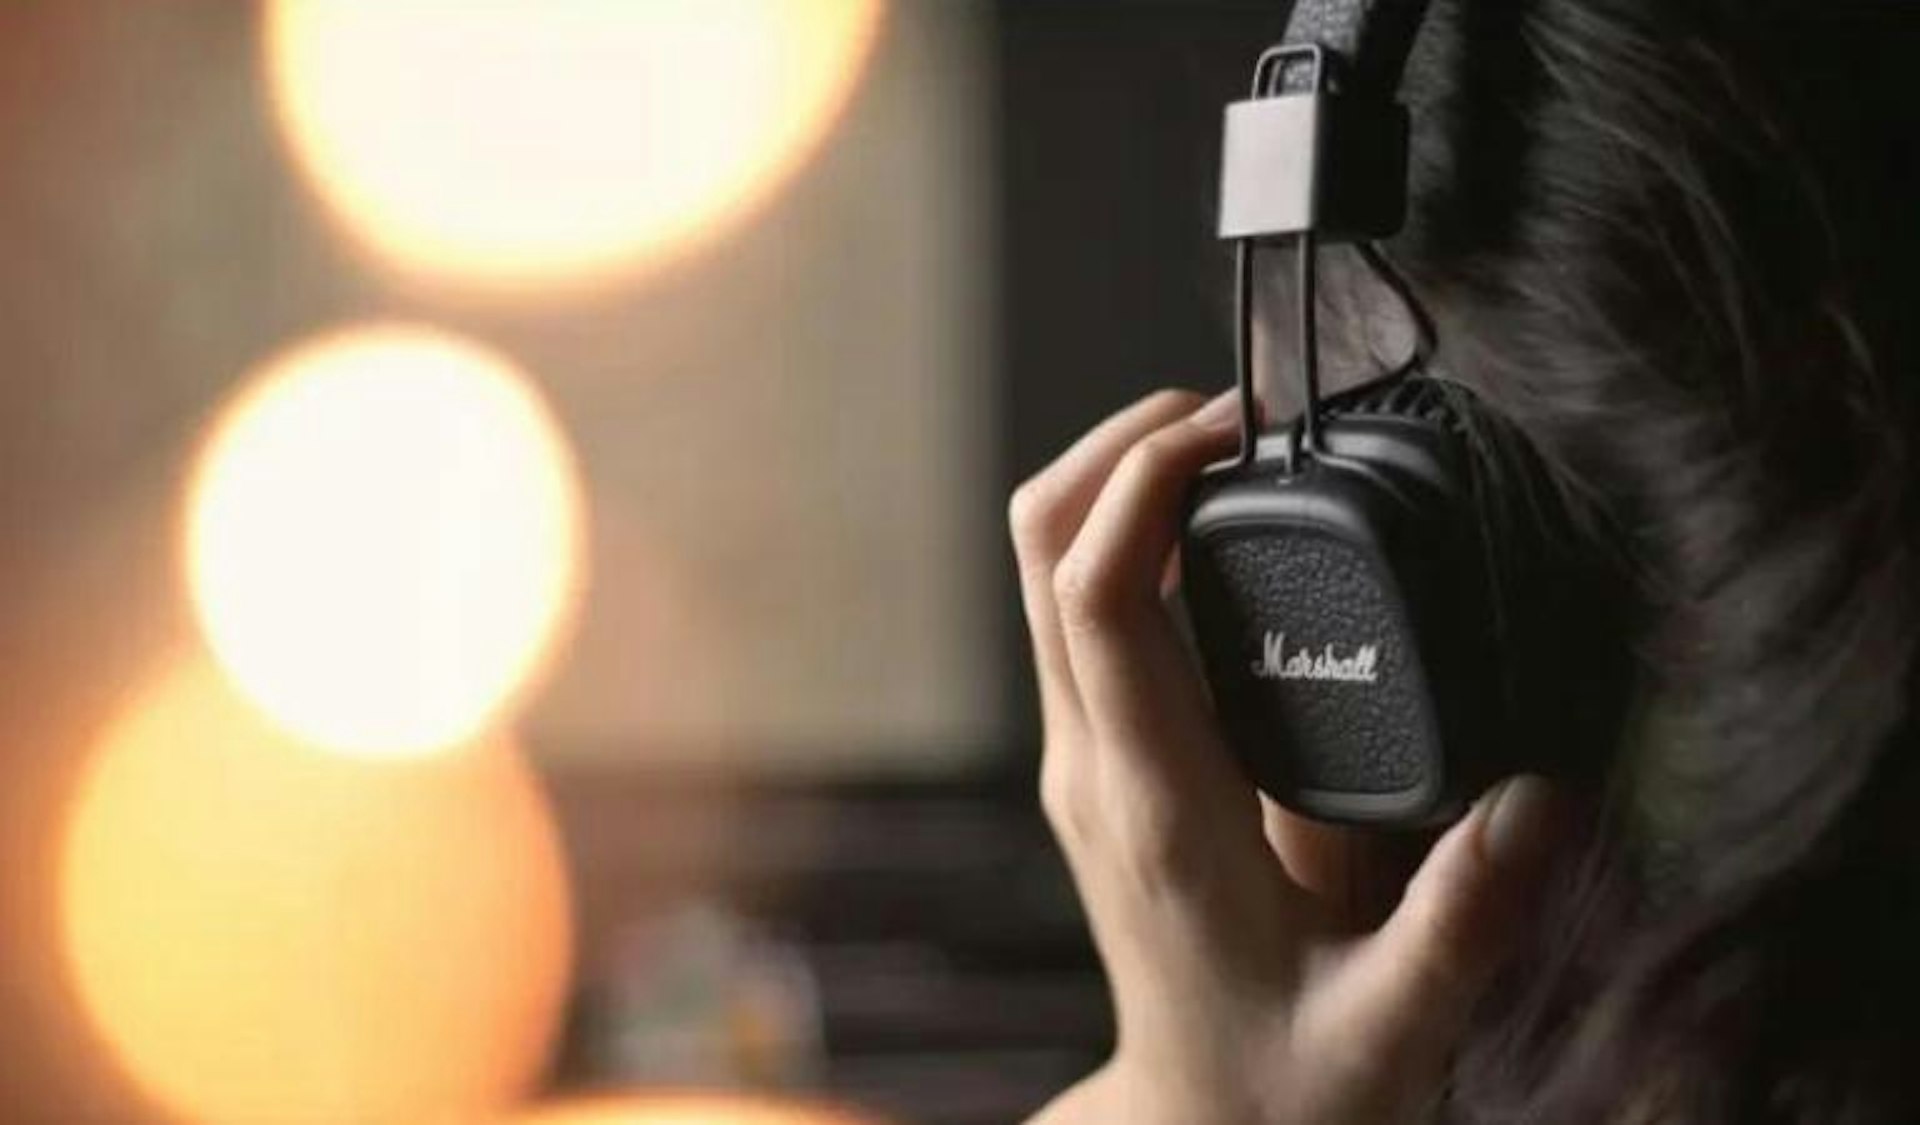 These are the best headphones for podcasting.